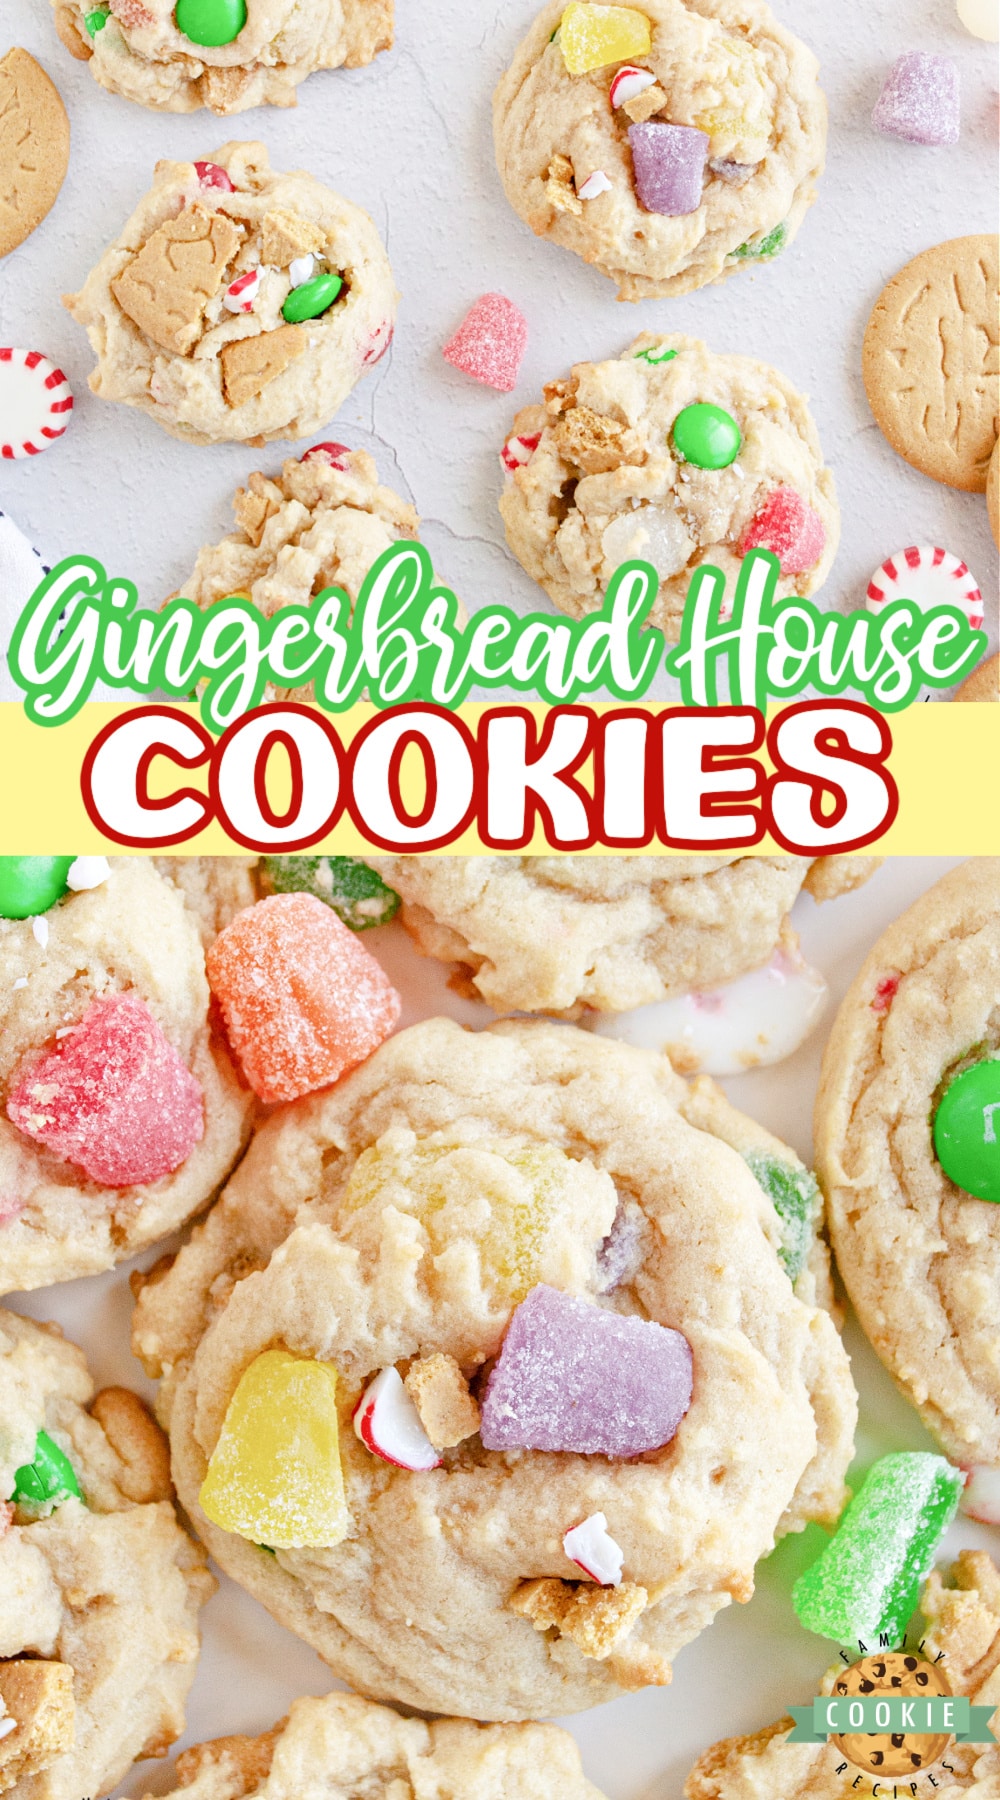 Gingerbread House Cookies made with gingerbread cookies, gum drops, and peppermint candies. If you can use it to decorate a gingerbread house with, you can put it in these cookies!